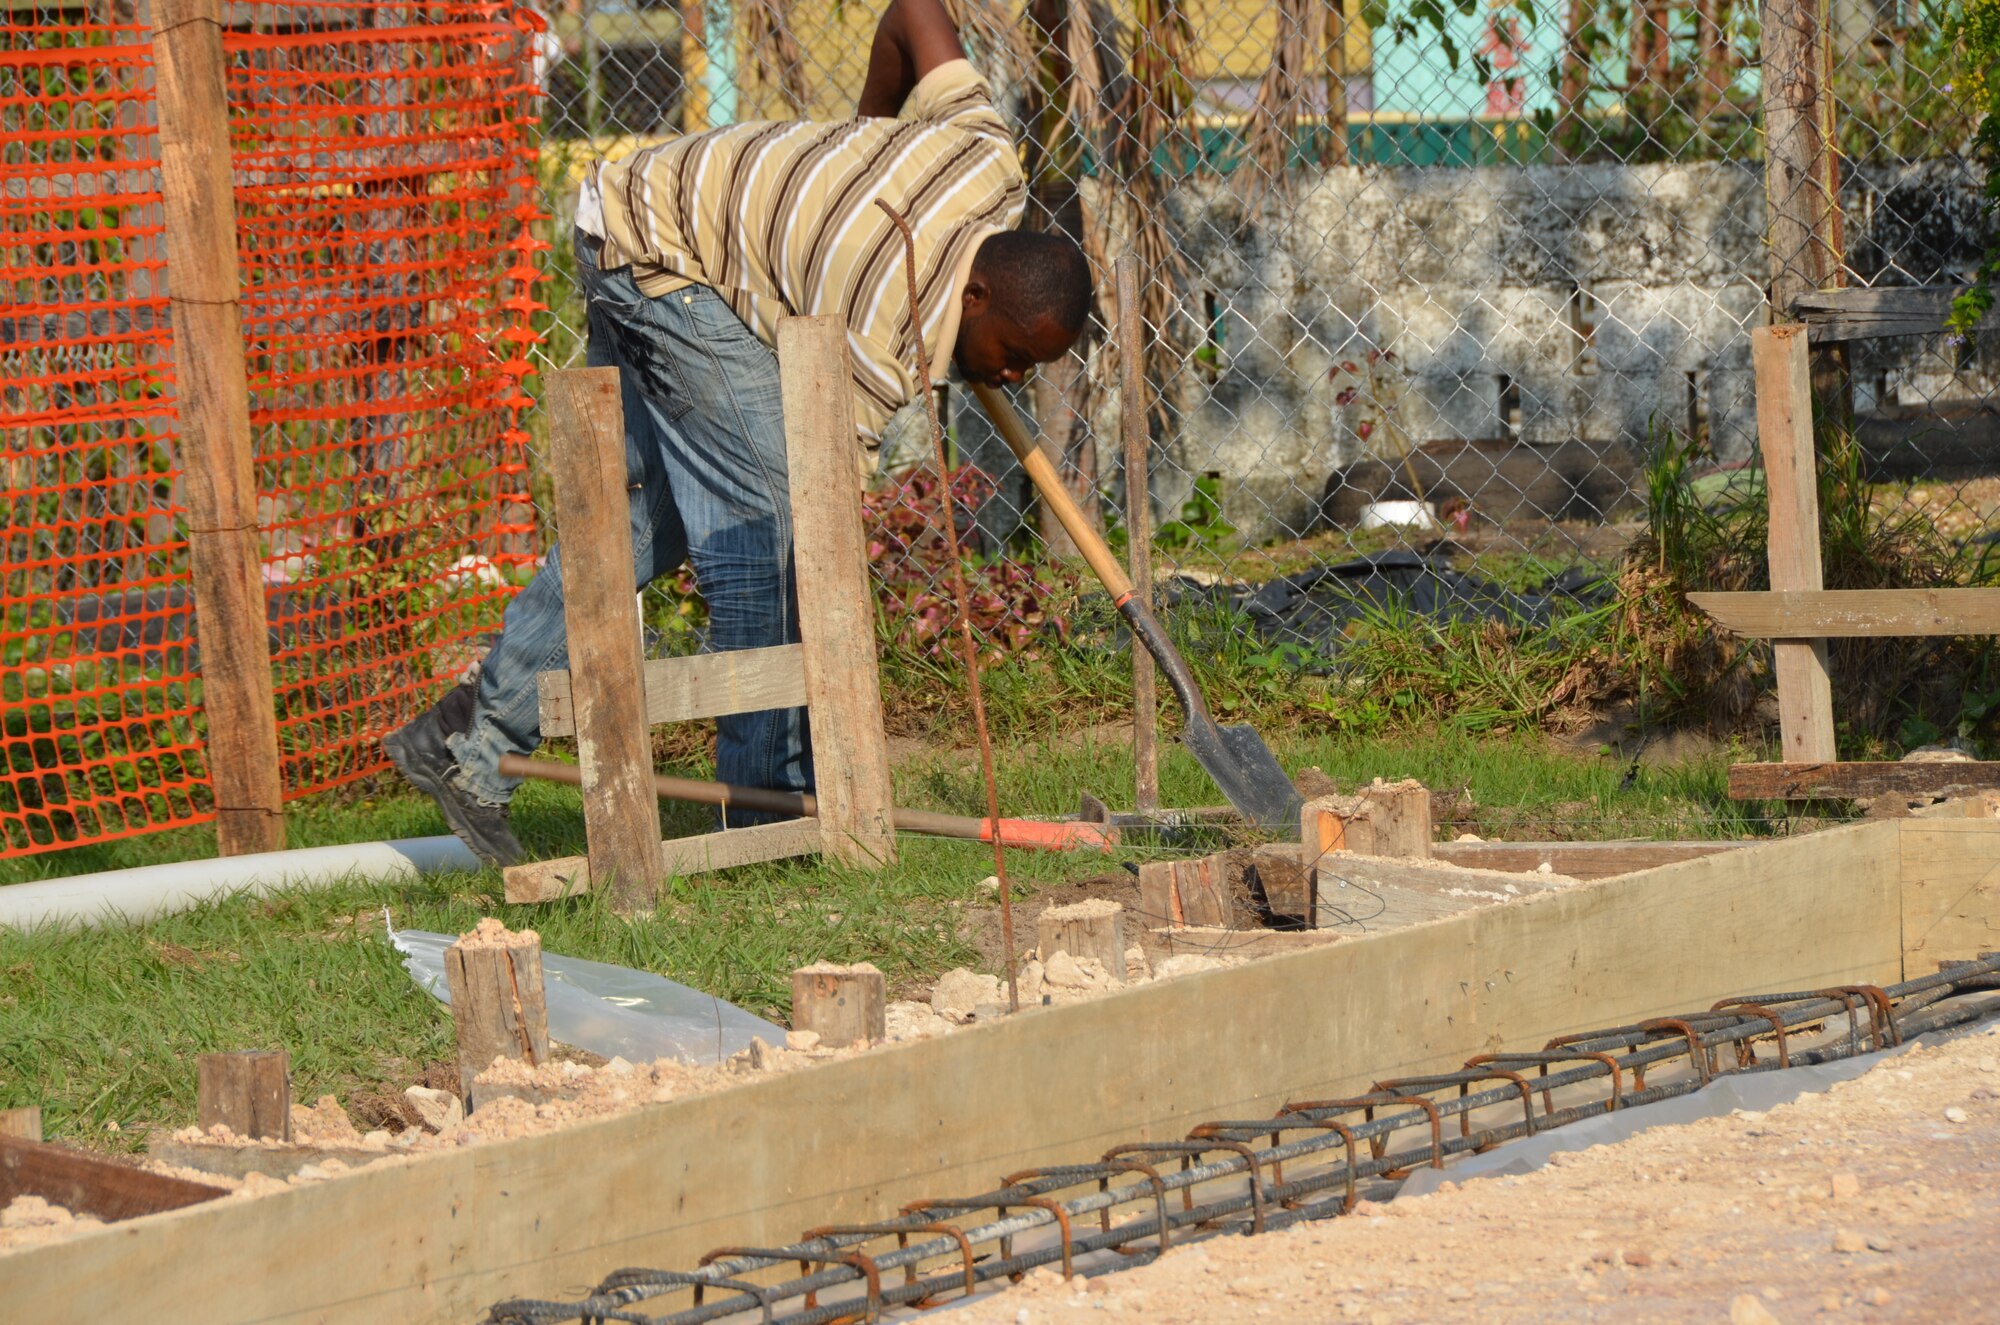 Belizean contractors prepare to level a concrete slab at the Stella Maris School for children with disabilities in Belize City, March 7. New Horizons engineering personnel and members of the Belize Defence Force will be adding an addition to this school after the exercise kicks off April 2. Civil engineers from both the U.S. and Belize will construct three schools in Belize City and one school in Hattieville. The schools will support furthering the education of children in the country. (USAF photo by Master Sgt. Kelly Ogden/Released)






